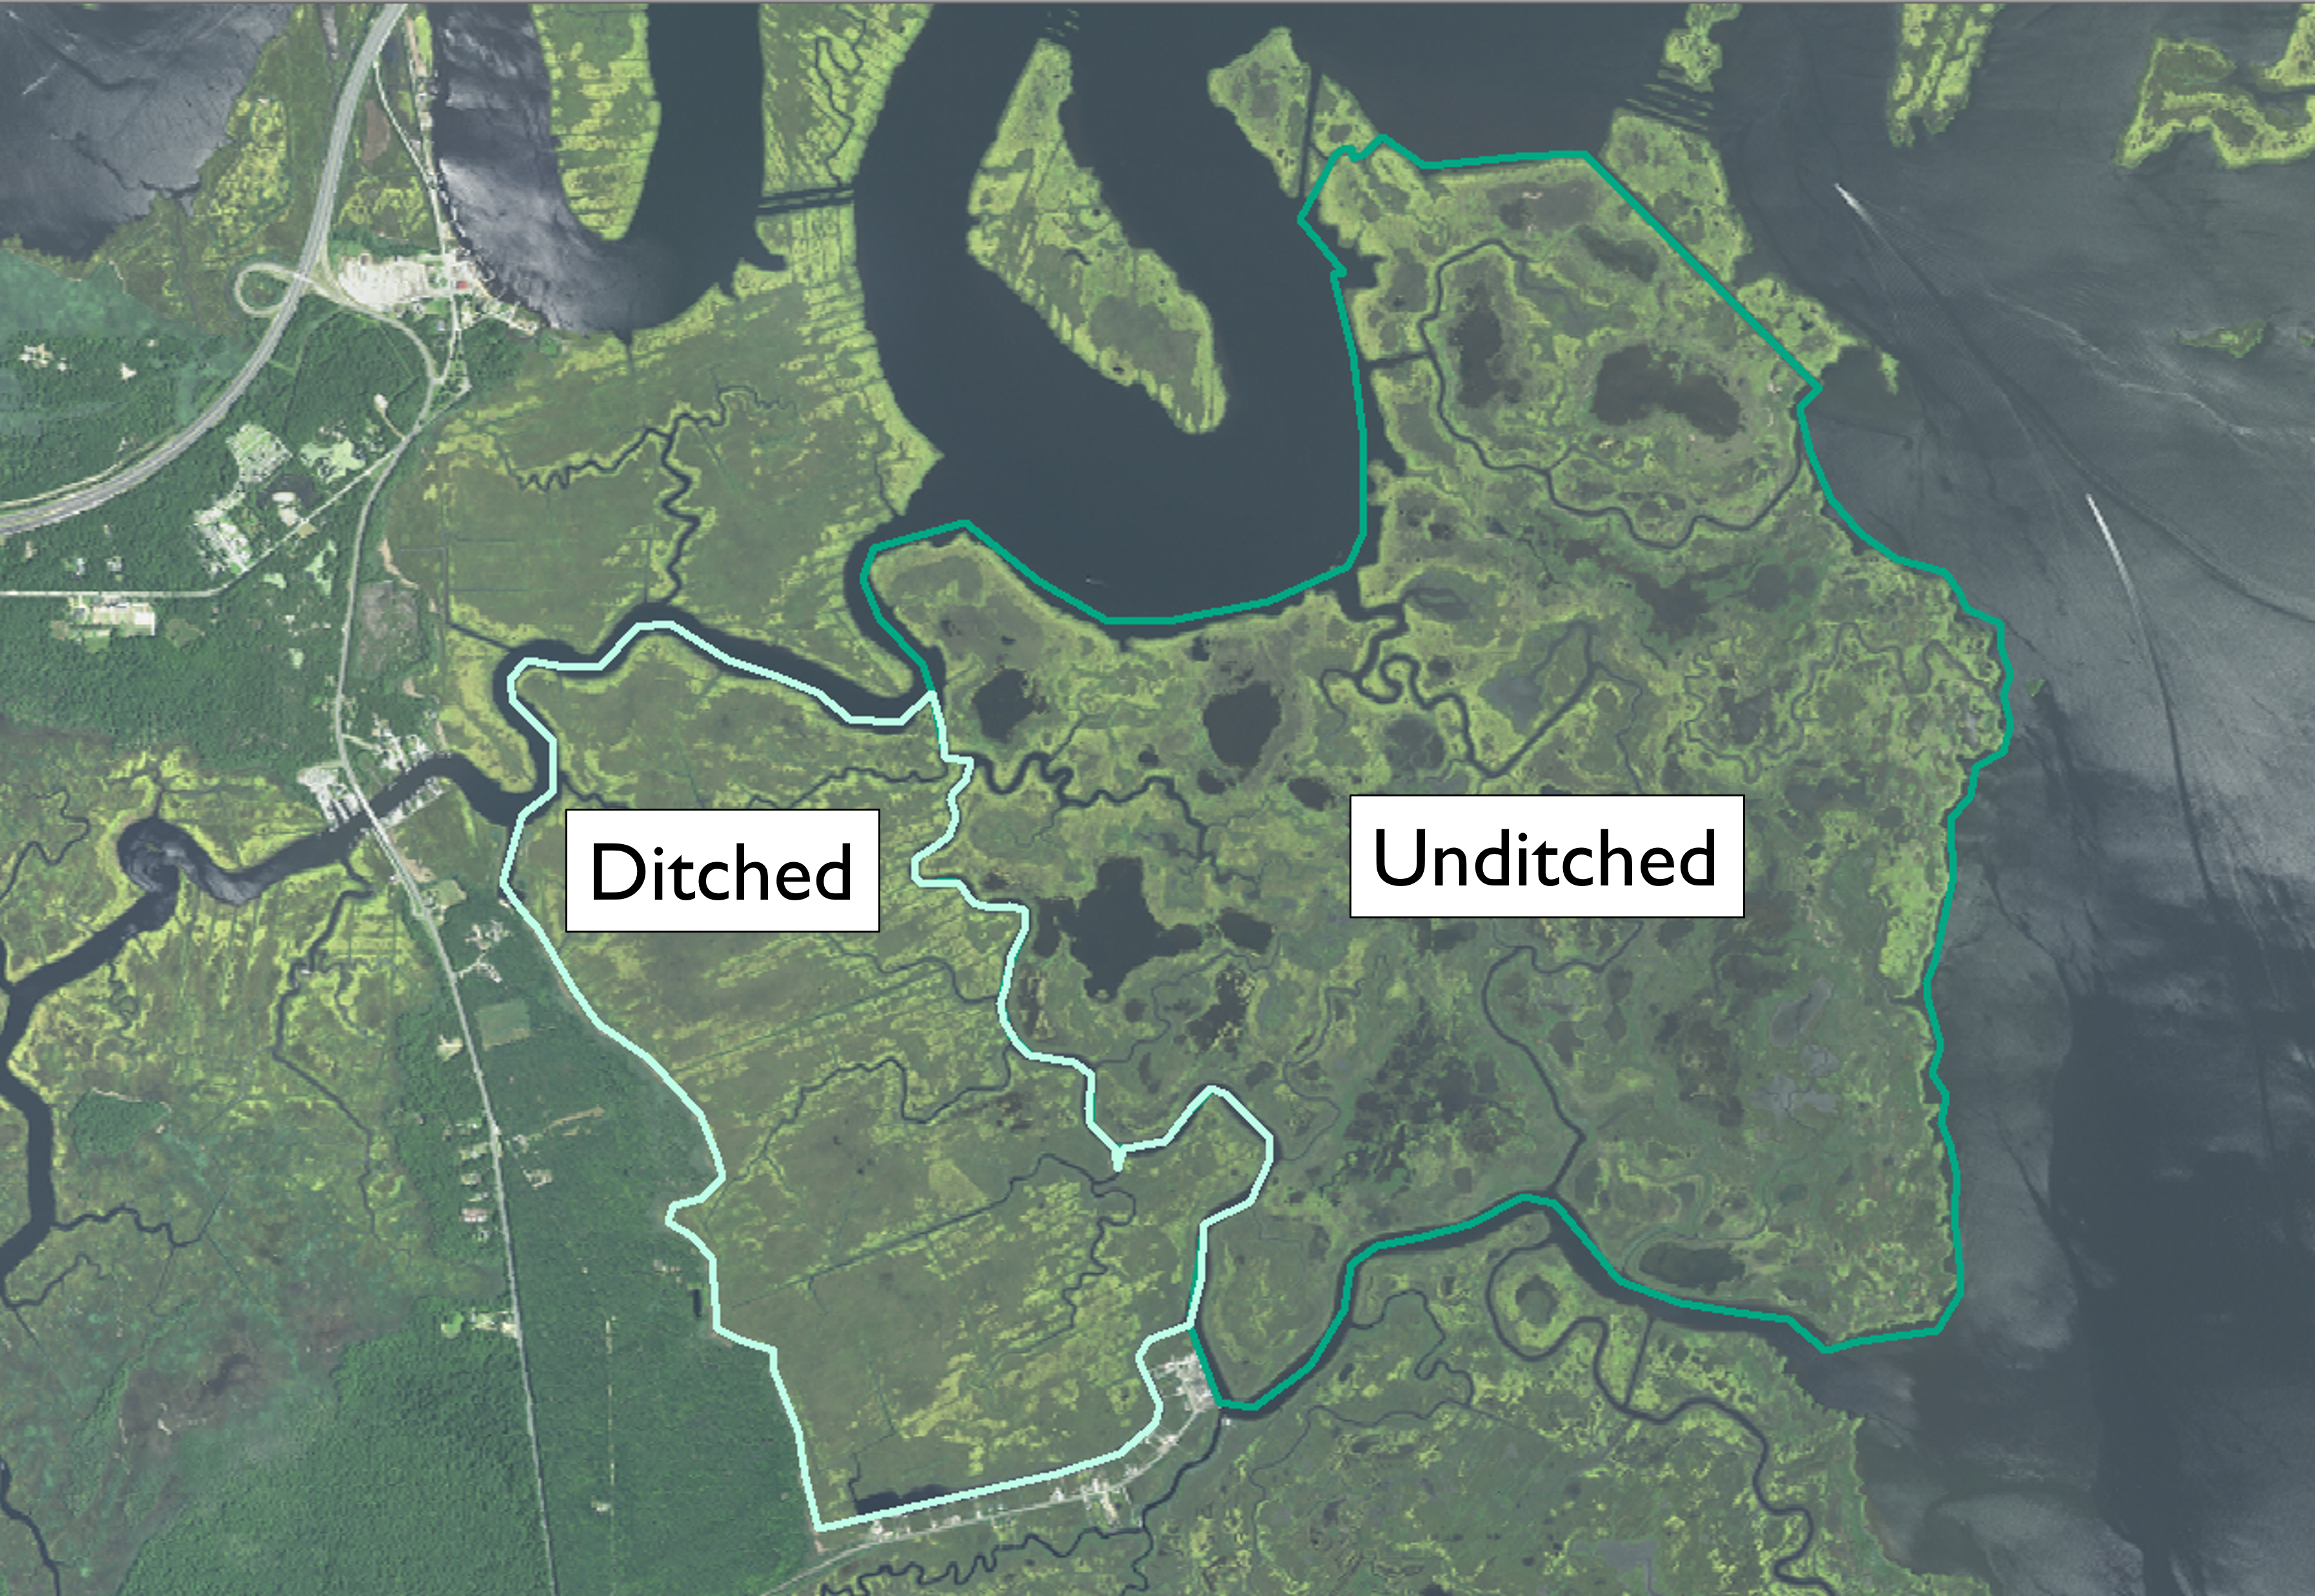 An aerial map shows a coastal marsh with unditched area demarcated in dark green adjacent to a ditched section demarcated in pale green. 